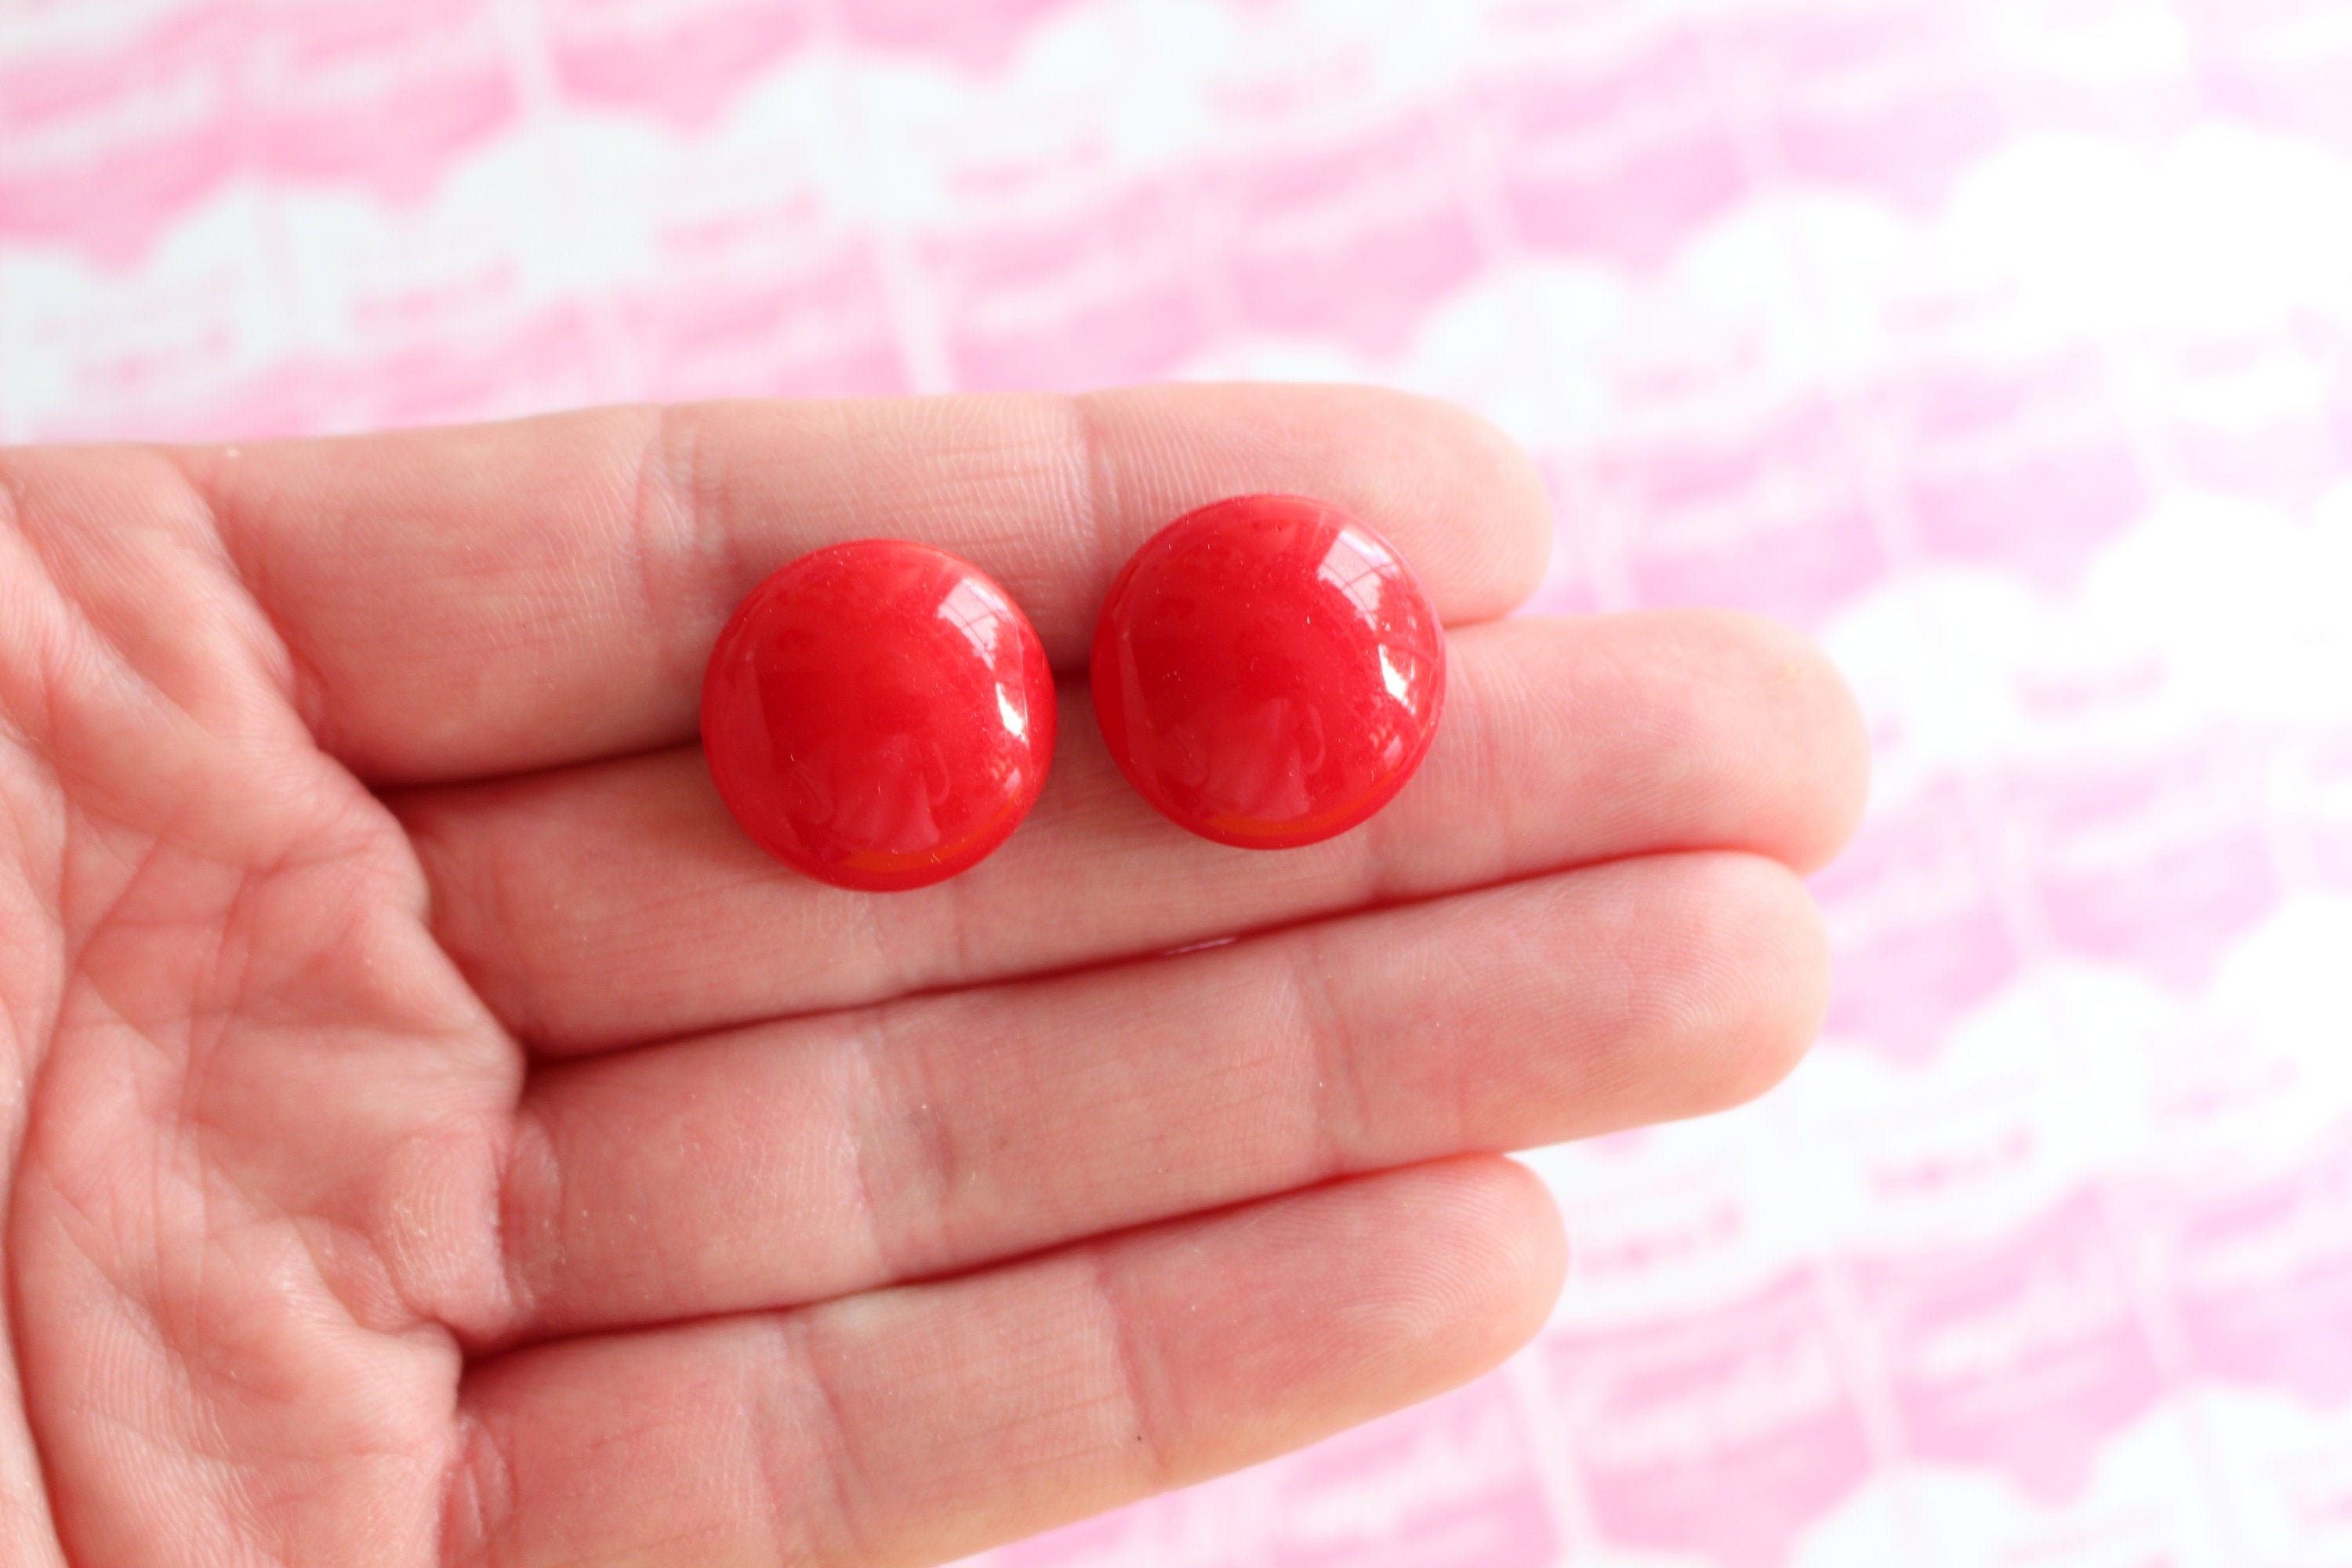 25 Transparent Red Buttons, sizes 1/2 up to 1-1/8, many styles, bulk  button pack